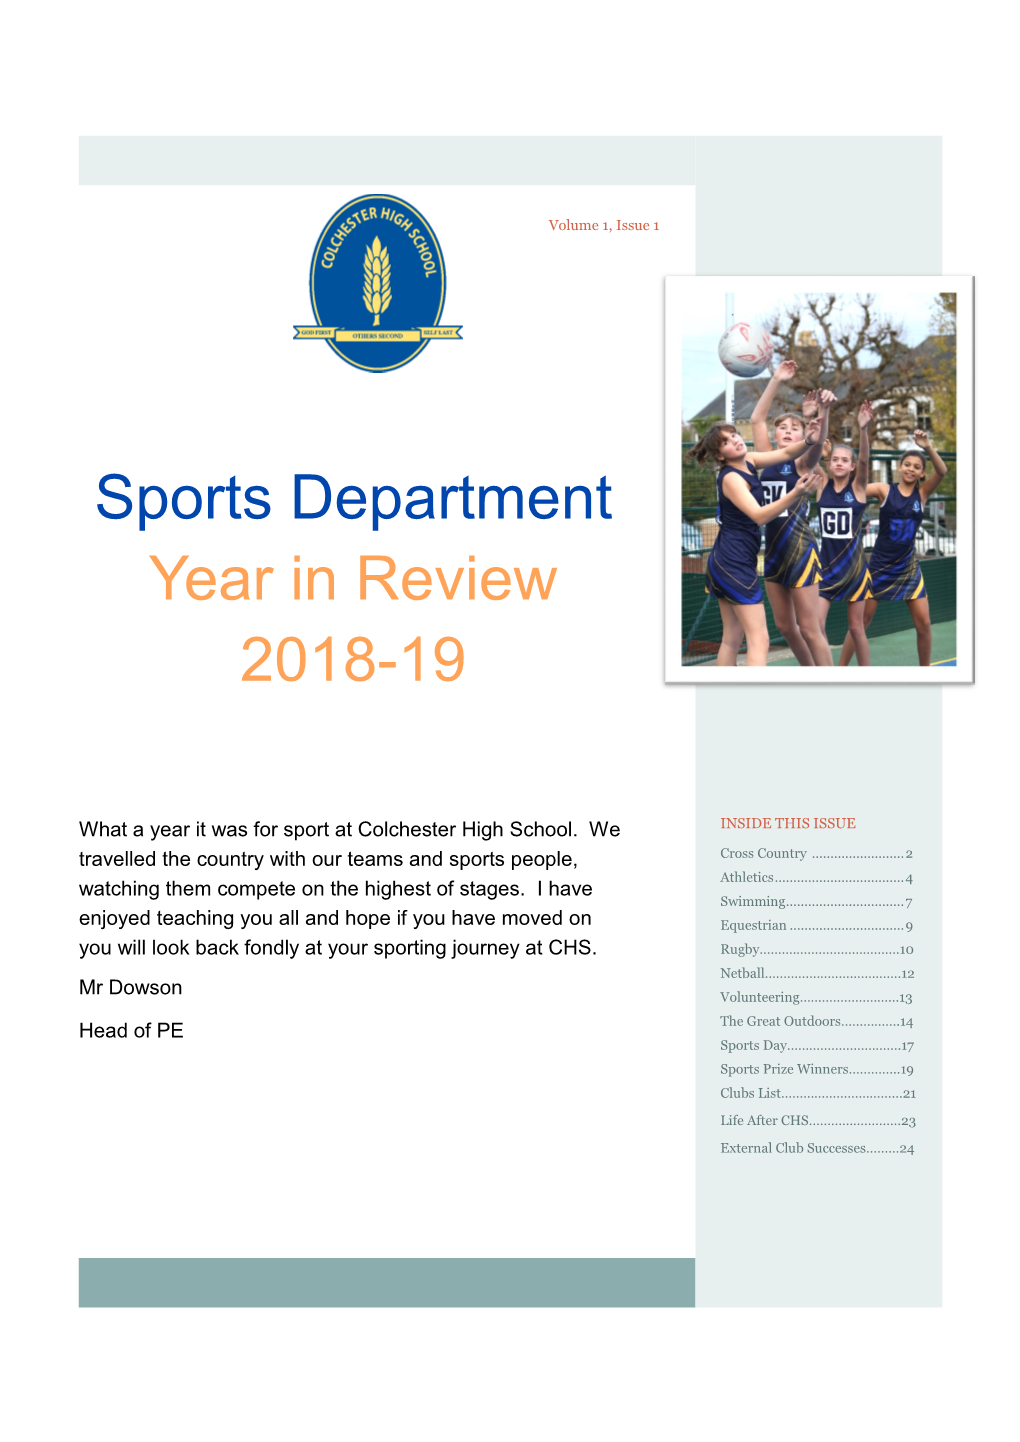 Sports Department Year in Review 2018-19